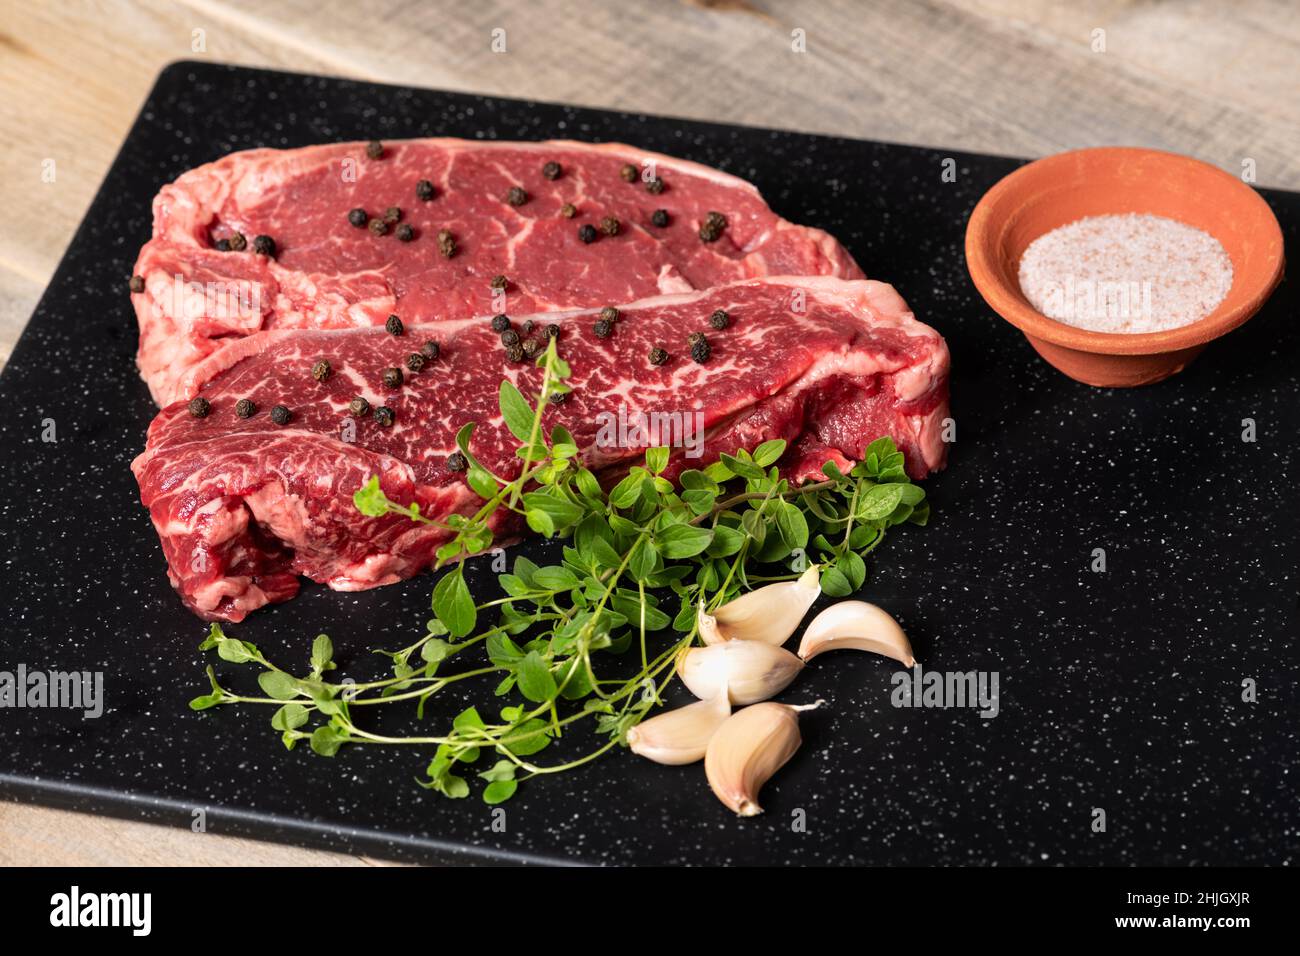 Two raw marbled beef steaks, ready for cooking, with fresh oregano, garlic, and peppercorns. Stock Photo